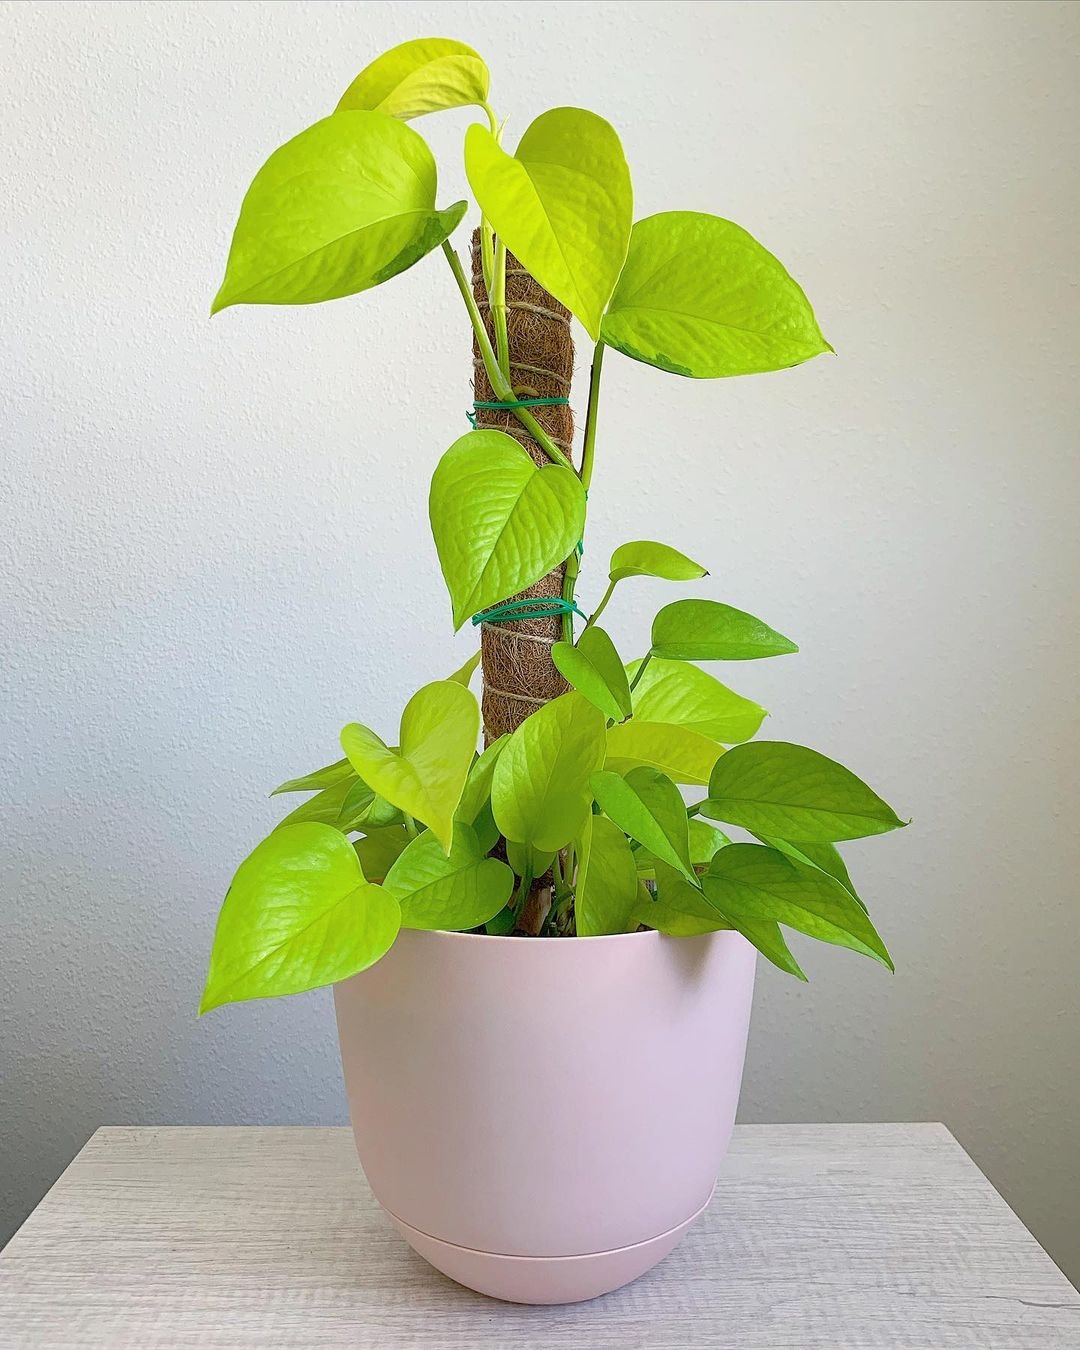  Neon Pothos: Ideal houseplant choice for its striking neon green foliage, bringing a touch of freshness and vibrancy indoors.